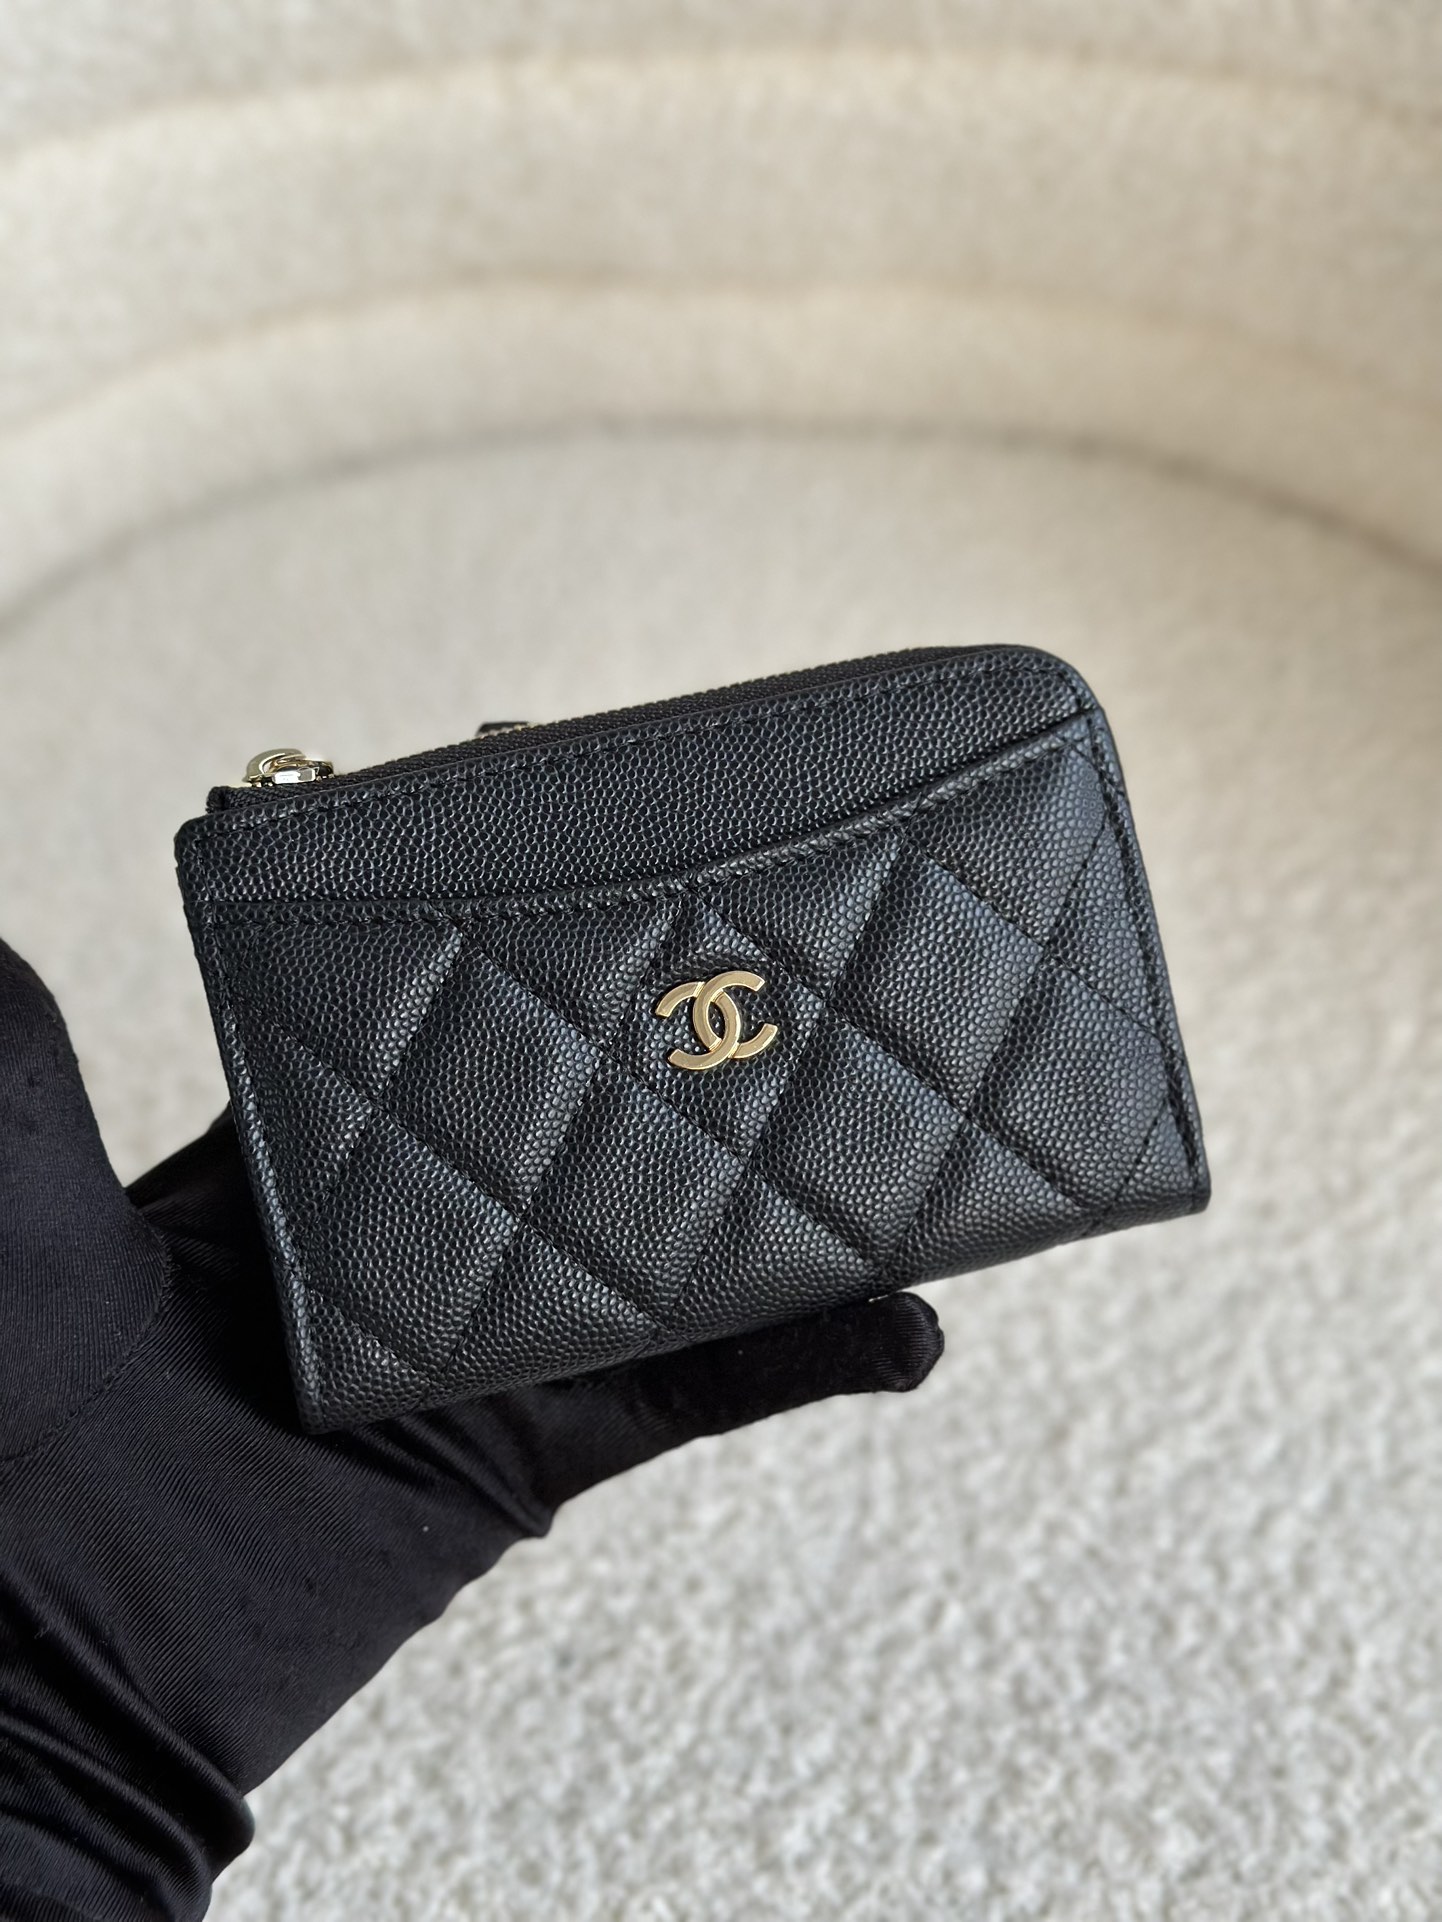 Chanel Classic Flap Bag Wallet Replcia Cheap From China
 Black Gold Hardware